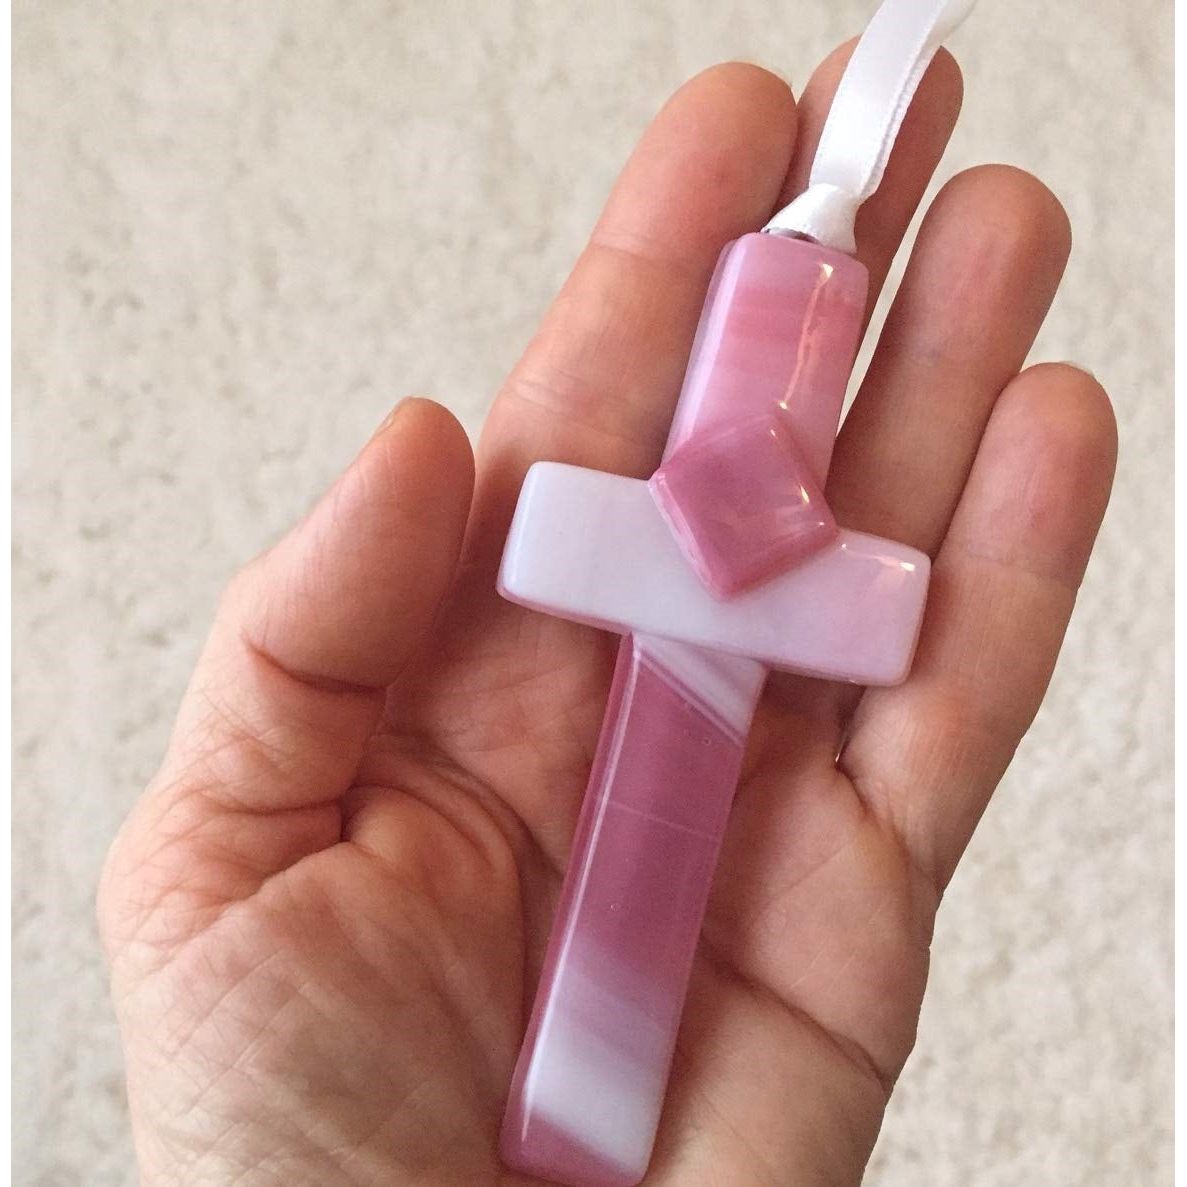 Daughter Now That You&#39;re a Mother Cross: Handmade Glass